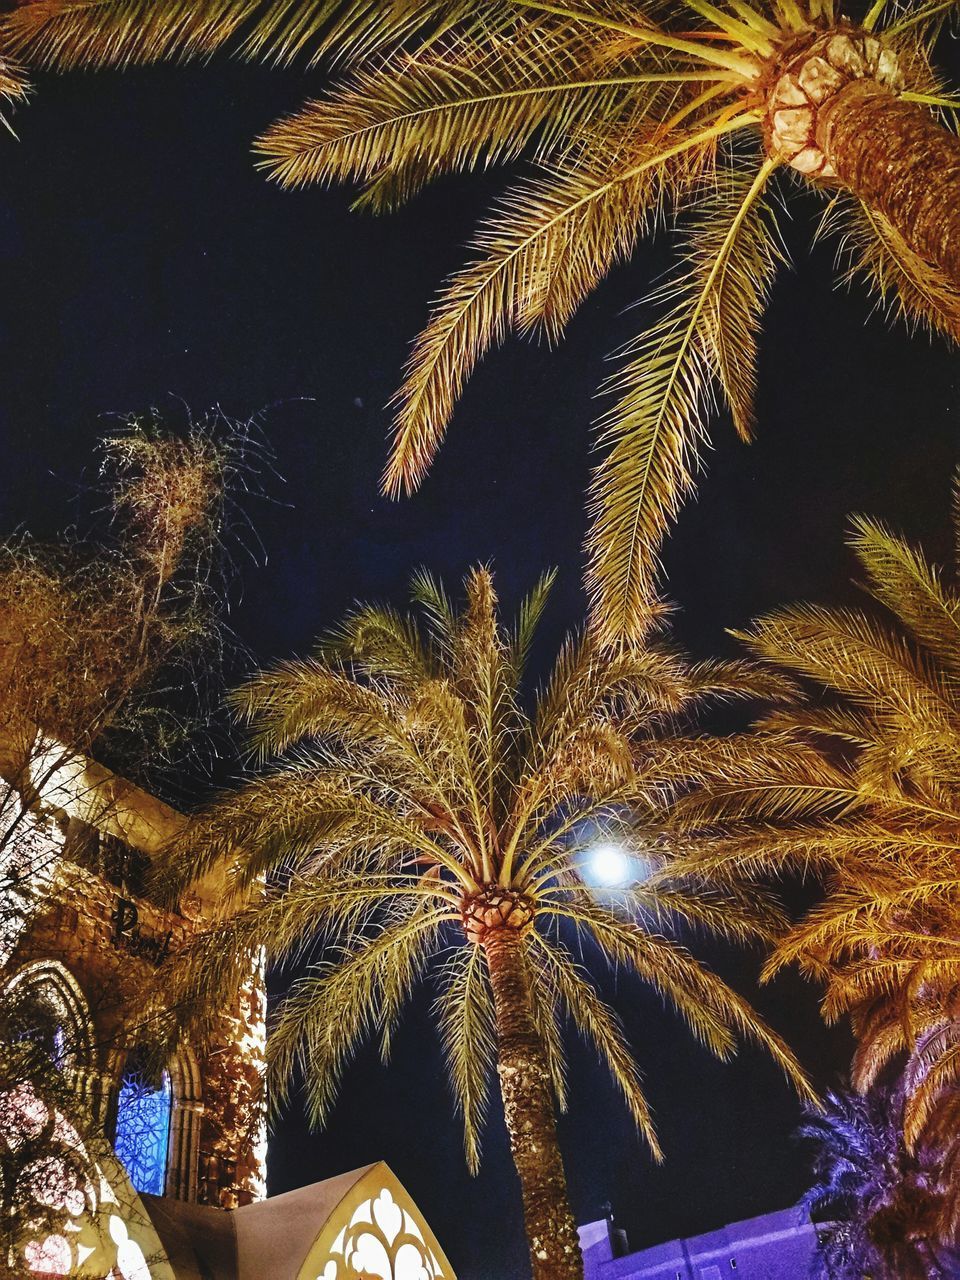 LOW ANGLE VIEW OF PALM TREE AGAINST SKY AT NIGHT